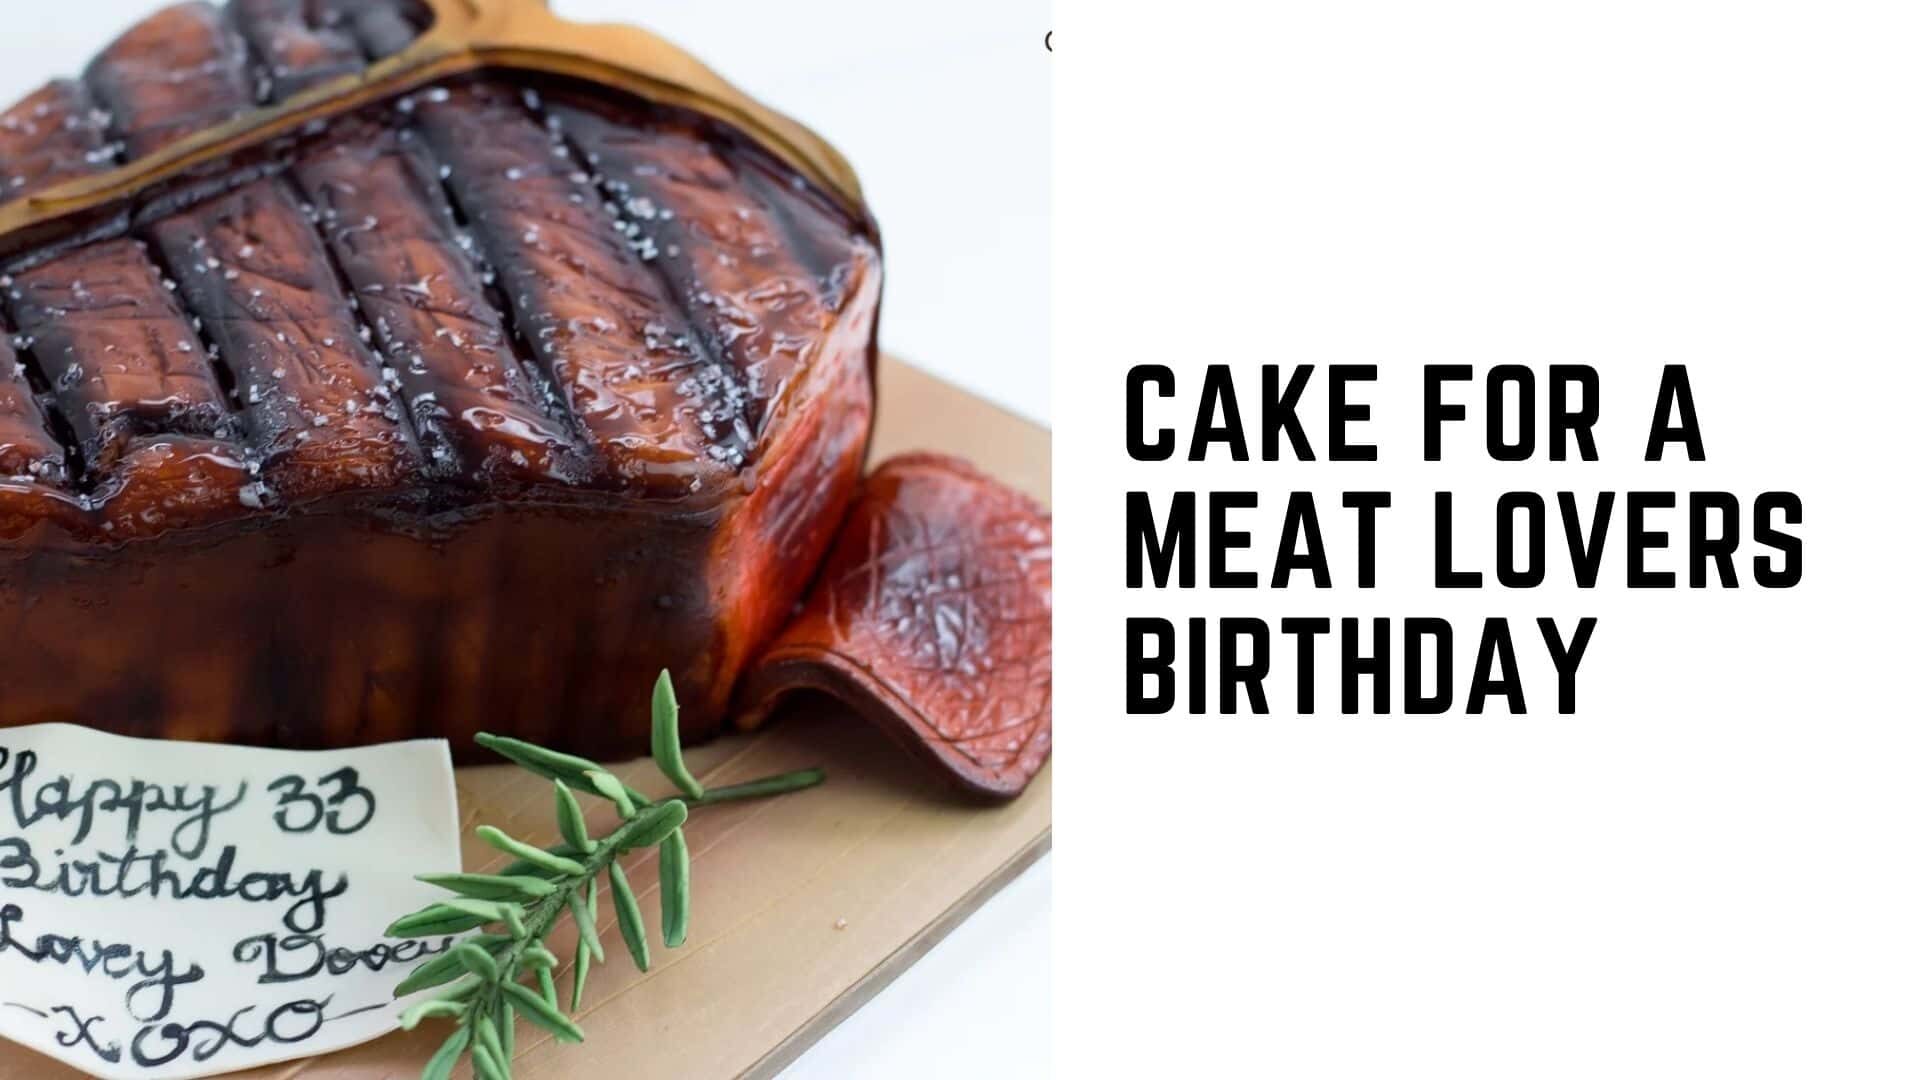 Cake for a meat lovers birthday